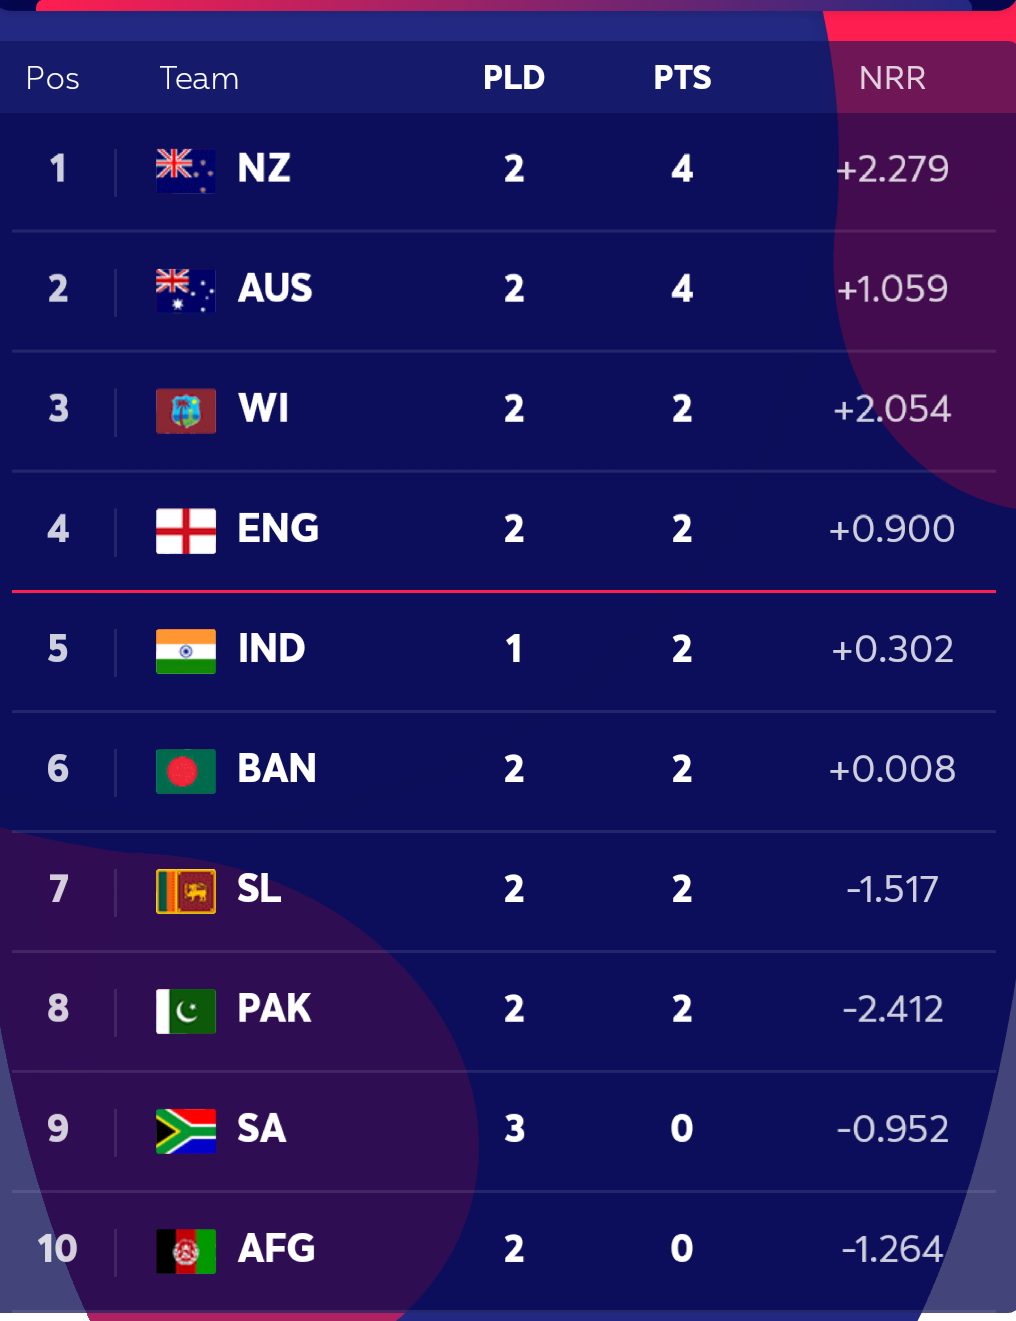 Icc men's t20 world cup 2022/23 . ICC-Cricket-World-Cup-2019-Points-Table-CW-Teams-Standing - Amazing Oman